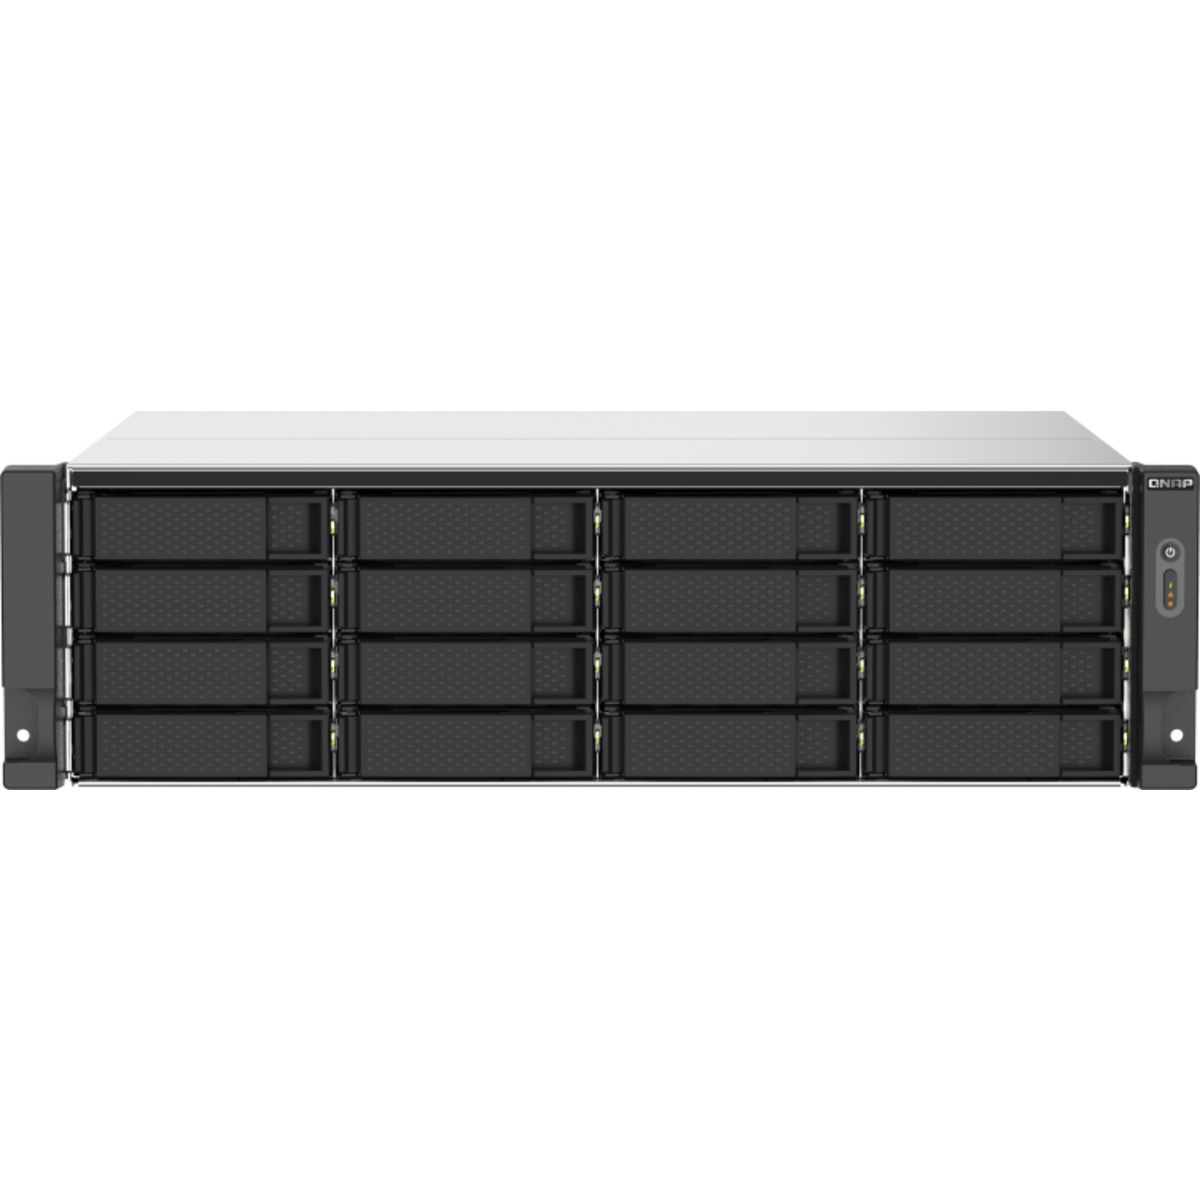 QNAP TS-1673AU-RP 52tb 16-Bay RackMount Multimedia / Power User / Business NAS - Network Attached Storage Device 13x4tb Western Digital Red Pro WD4005FFBX 3.5 7200rpm SATA 6Gb/s HDD NAS Class Drives Installed - Burn-In Tested - FREE RAM UPGRADE TS-1673AU-RP